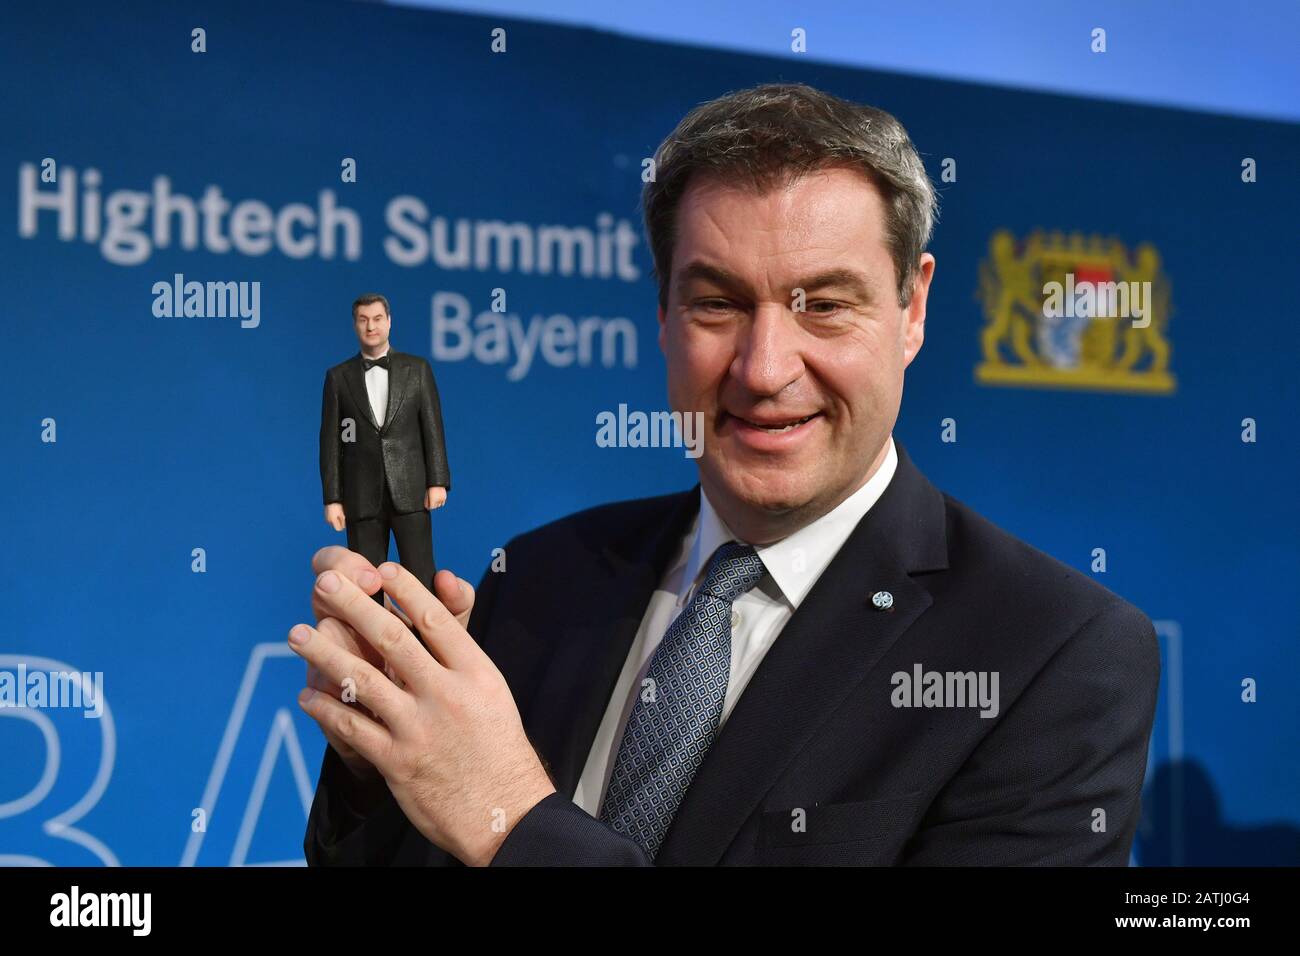 Markus SOEDER (Minister President Bavaria and CSU Chairman) thinks of a 3D figure. At the invitation of Prime Minister Dr. Markus Soeder meet experts in the field of future technologies for high-tech Sumwith Bayern.KI, Künstliche Intelligenz. On February 3rd, 2020 Technical University Munich (TUM) in Garching. | usage worldwide Stock Photo